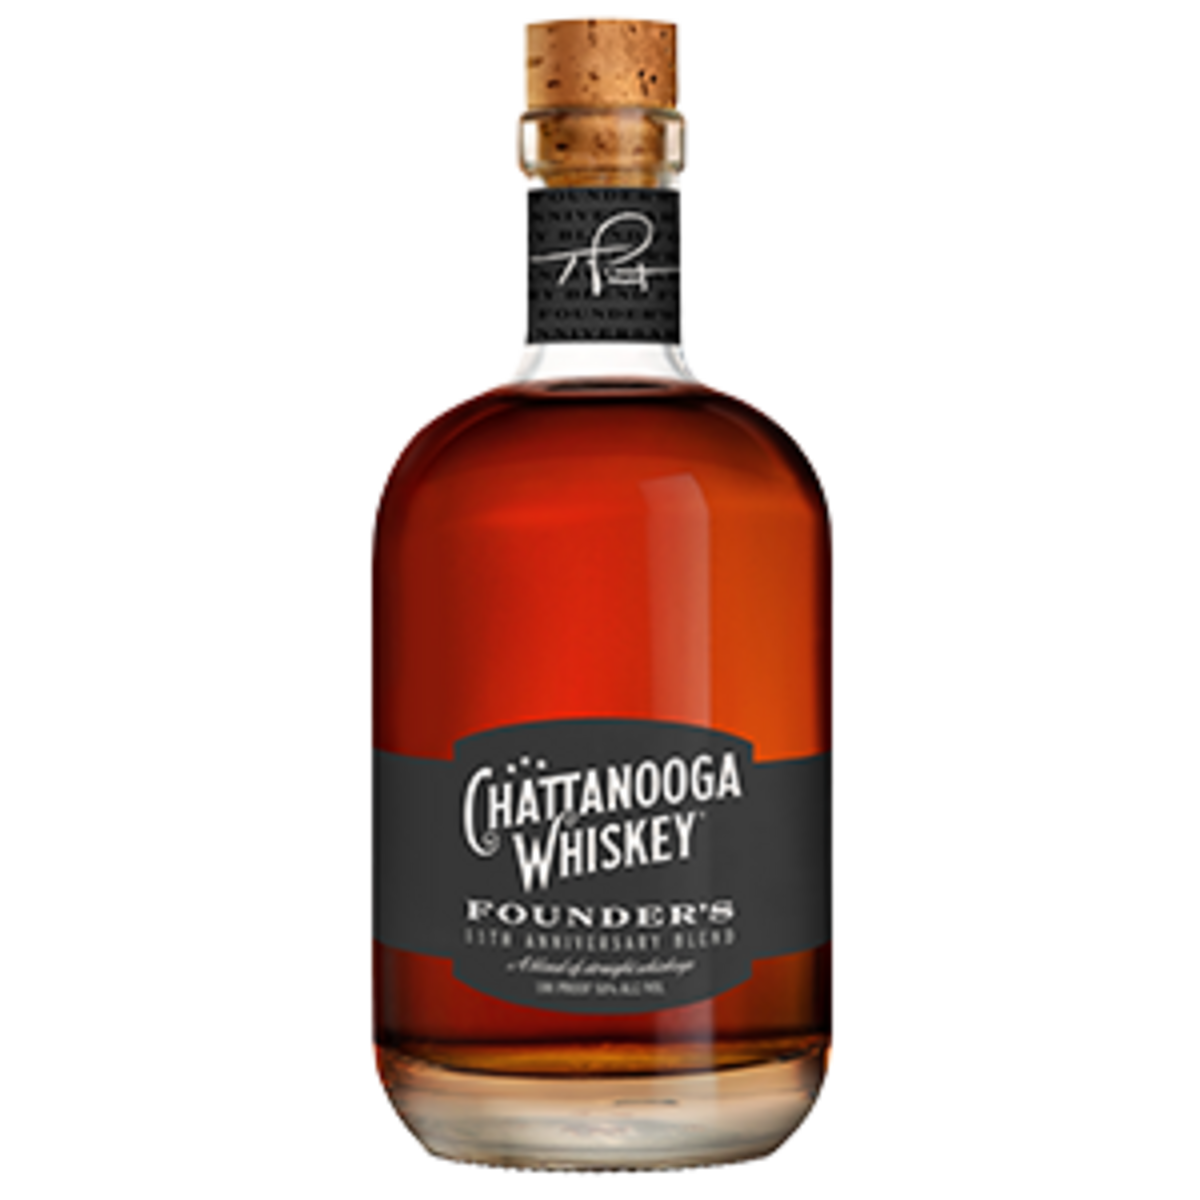 Chattanooga Whiskey Founder's 11th Anniversary Blend Review